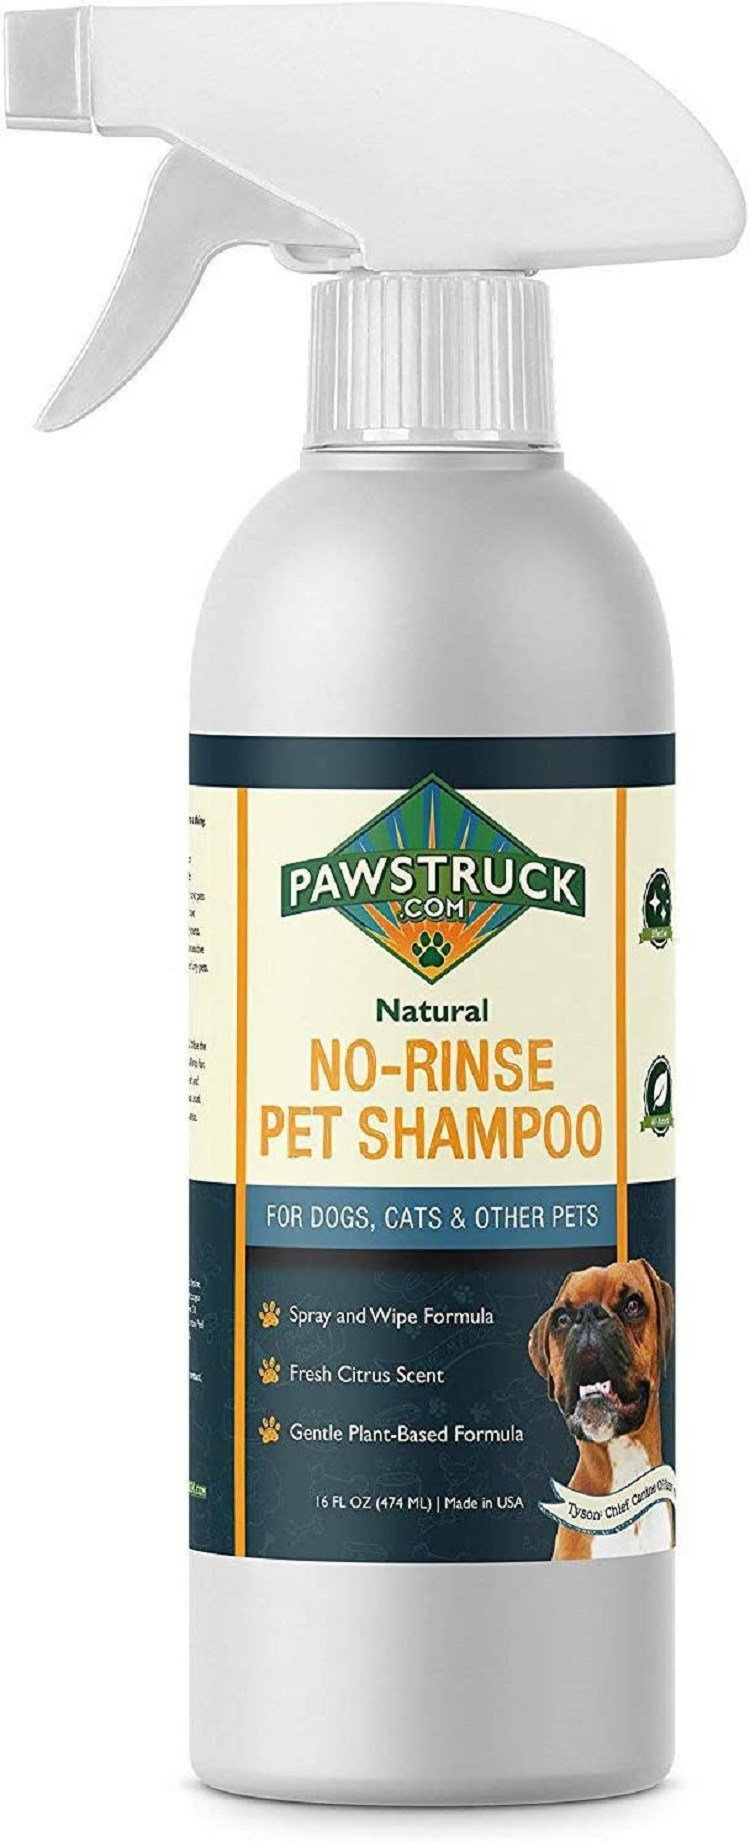 what is the best waterless shampoo for dogs